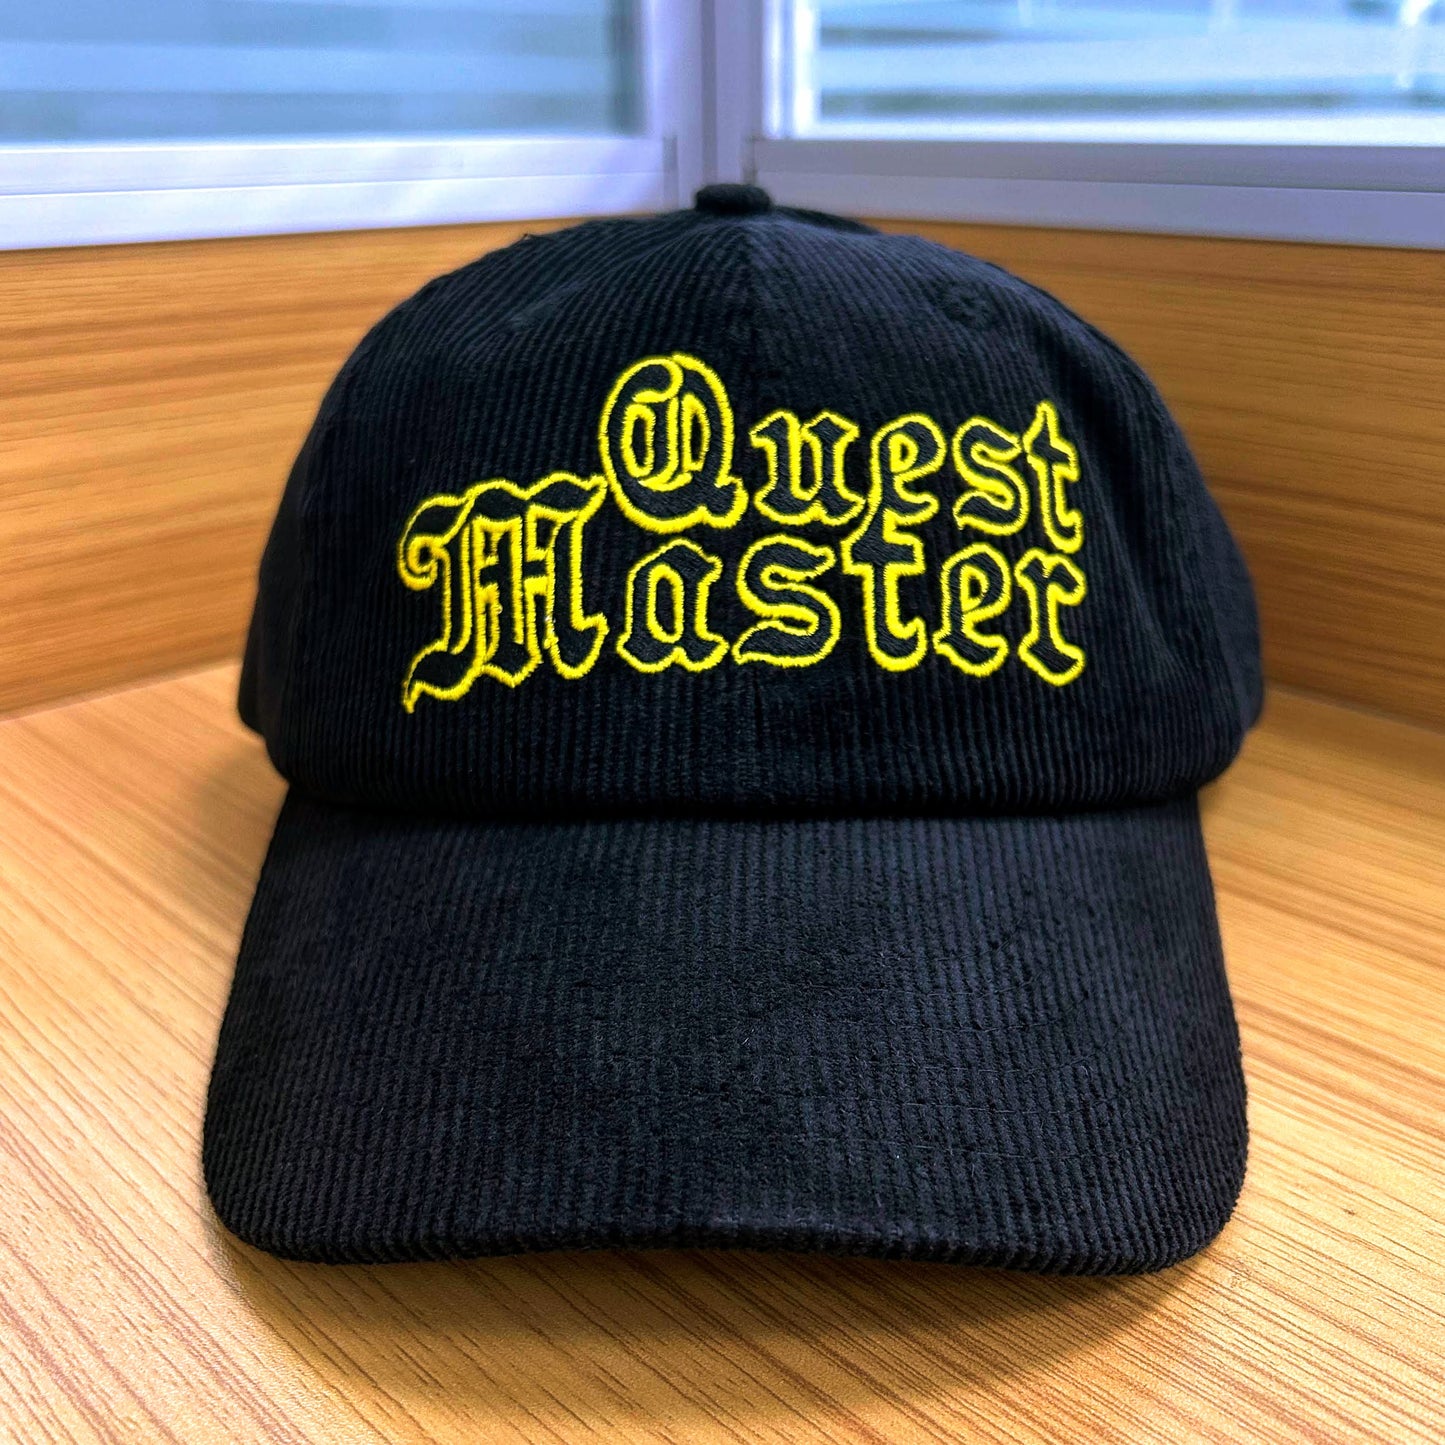 QUEST MASTER "Fantasy Synthesizer Music" Embroidered Corduroy Dad Hat (2 color options)